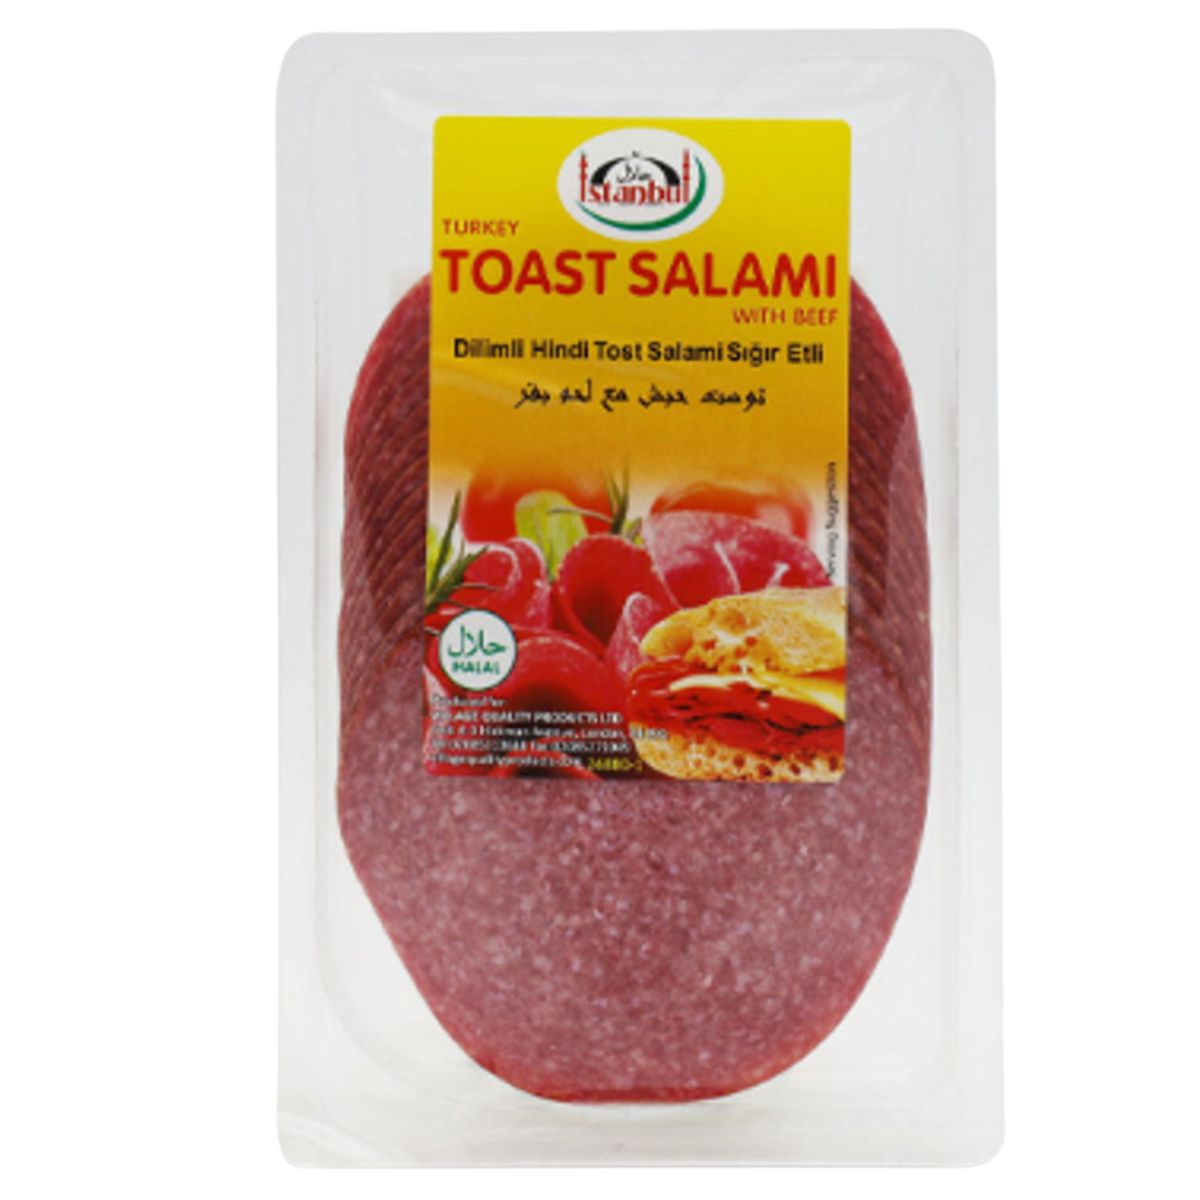 A package of Istanbul - Toast Salami with Beef - 200g on a white background.